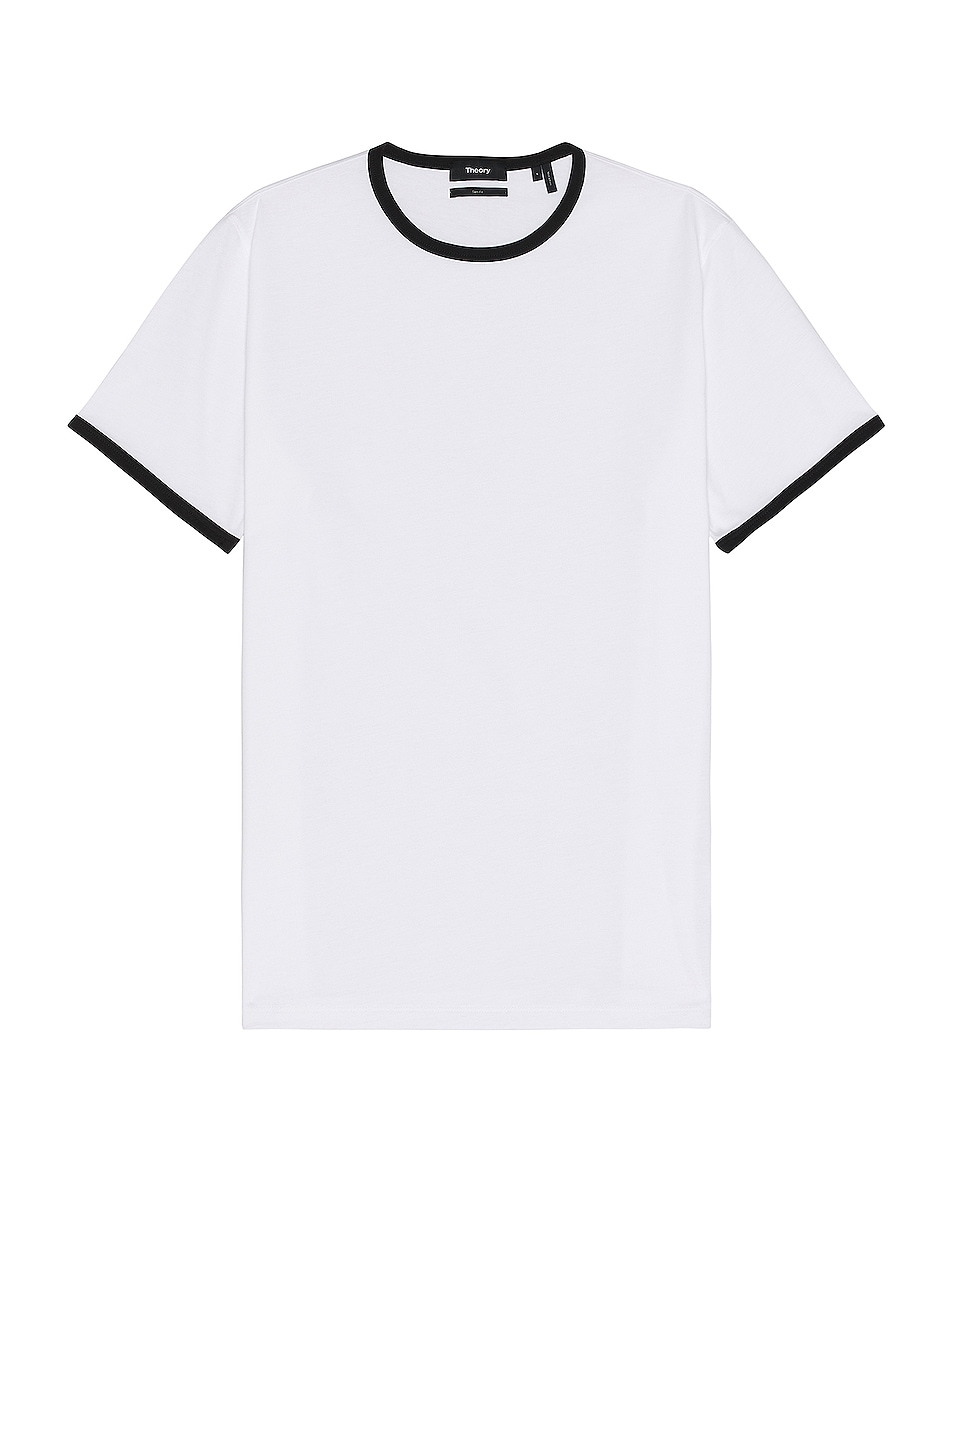 Image 1 of Theory Cilian T-shirt in White & Black